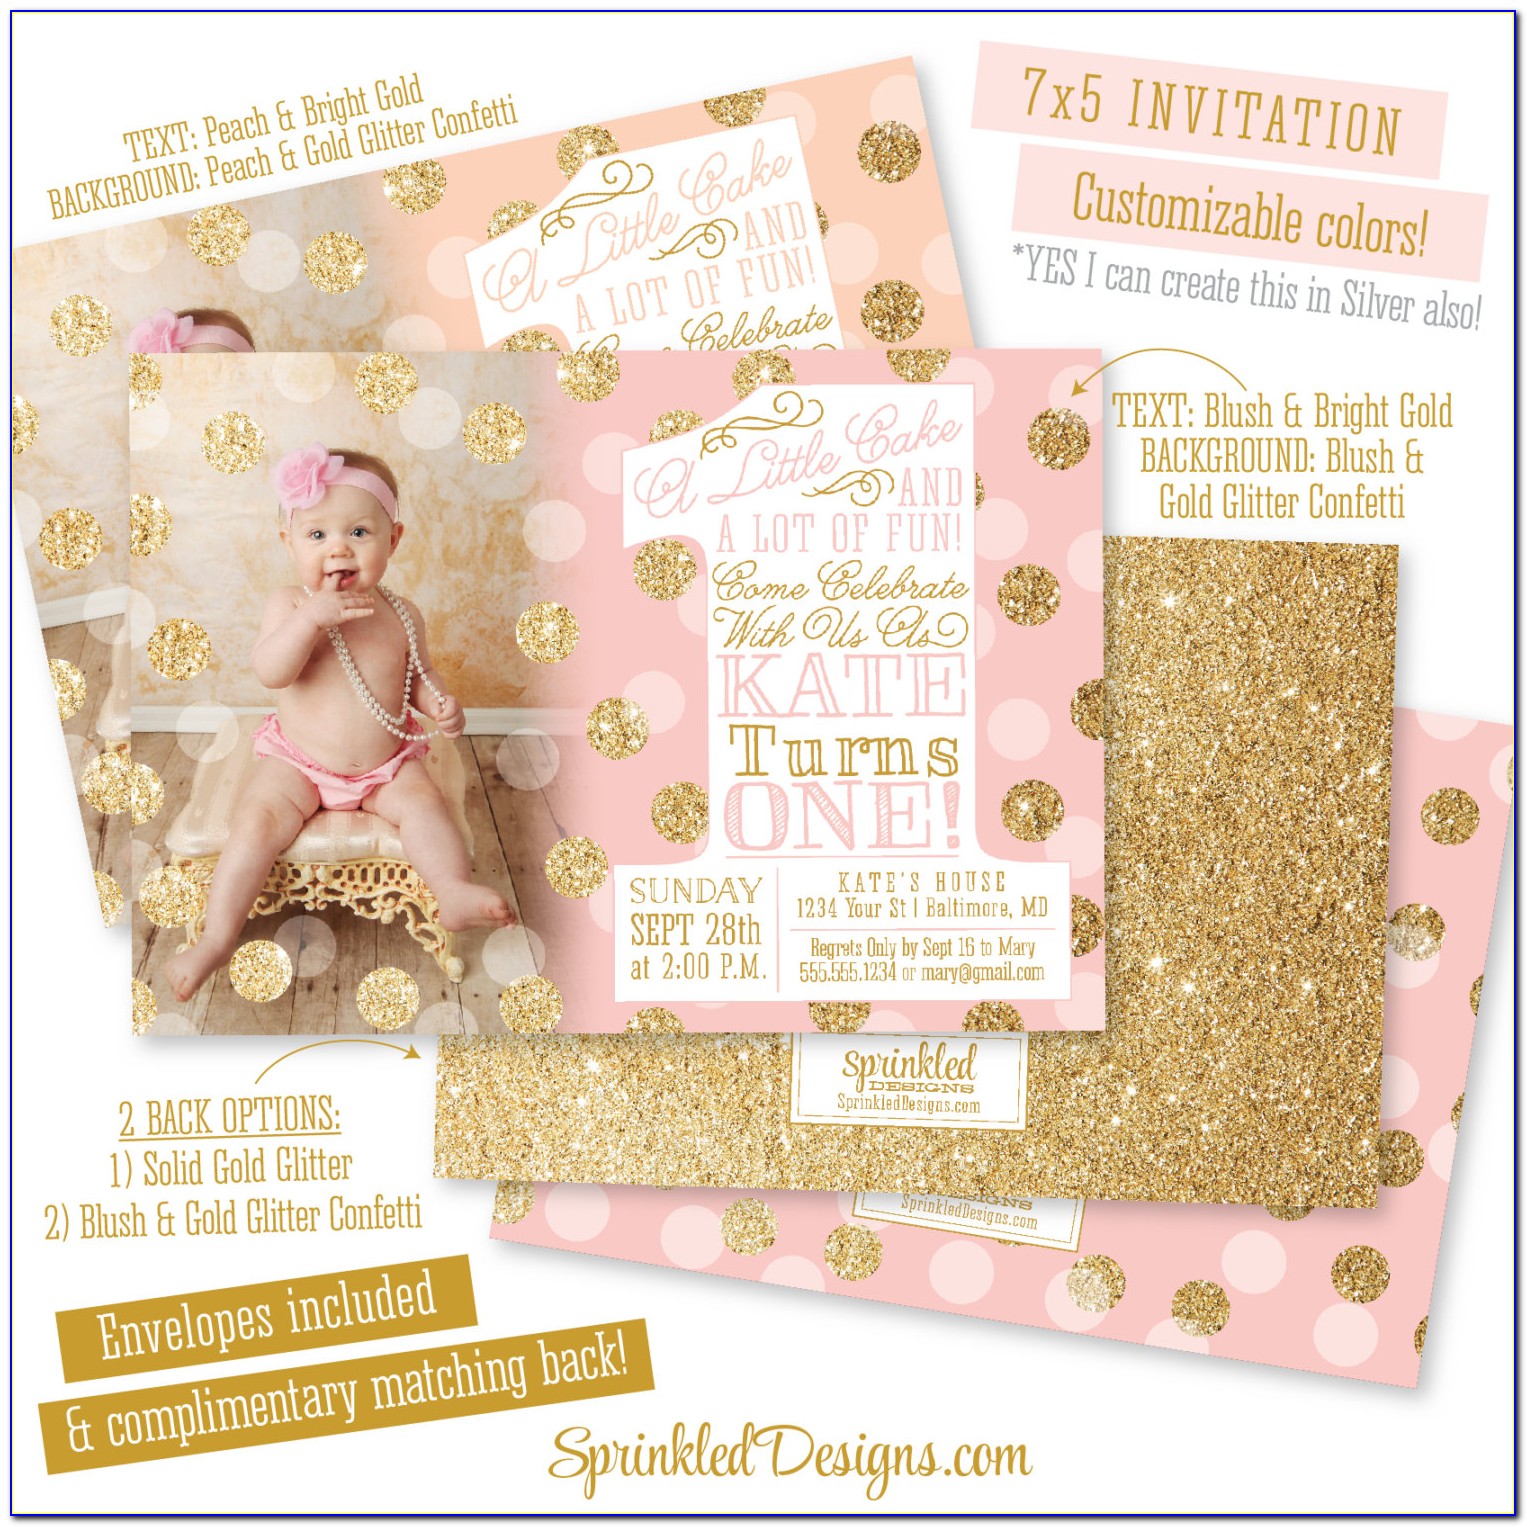 Pink And Gold Pumpkin First Birthday Invitations